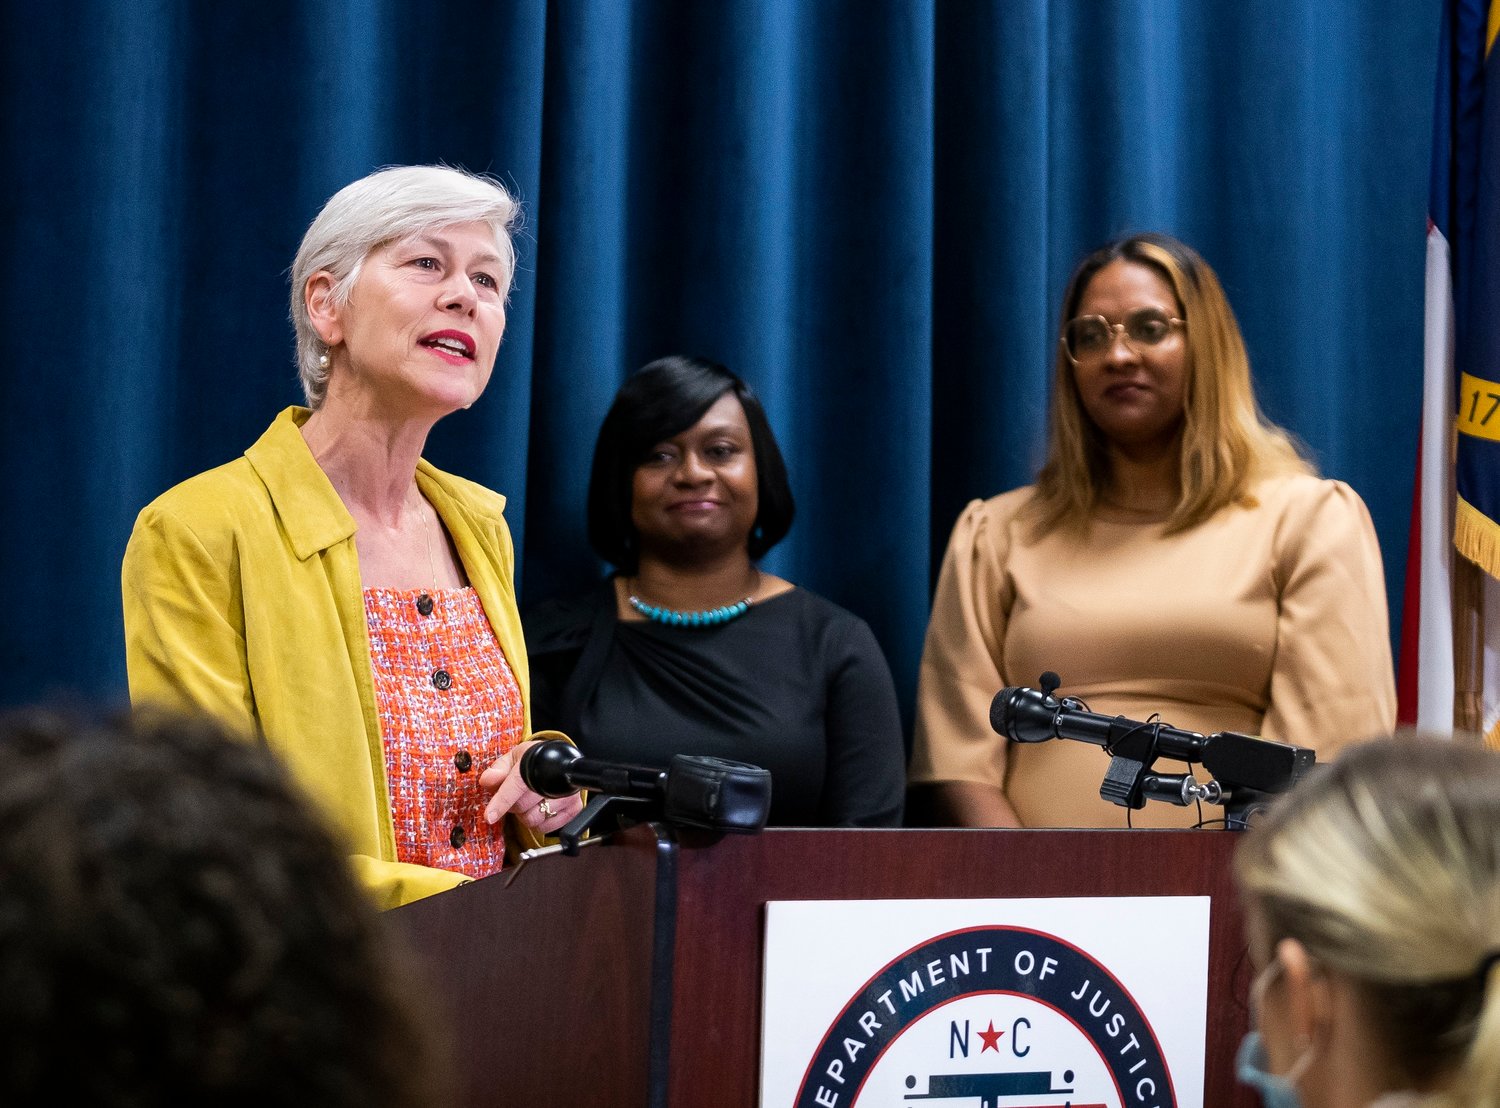 U.S. Rep. Deborah Ross, D-Raleigh, speaks at a news conference at the North Carolina Department of Justice on Thursday to discuss legislation to support resources for survivors of sexual assault and domestic violence. Looking on are Monika Johnson-Hostler, executive director of the North Carolina Coalition Against Sexual Assault (center), and Nisha Williams, legal director of the North Carolina Coalition Against Domestic Violence.